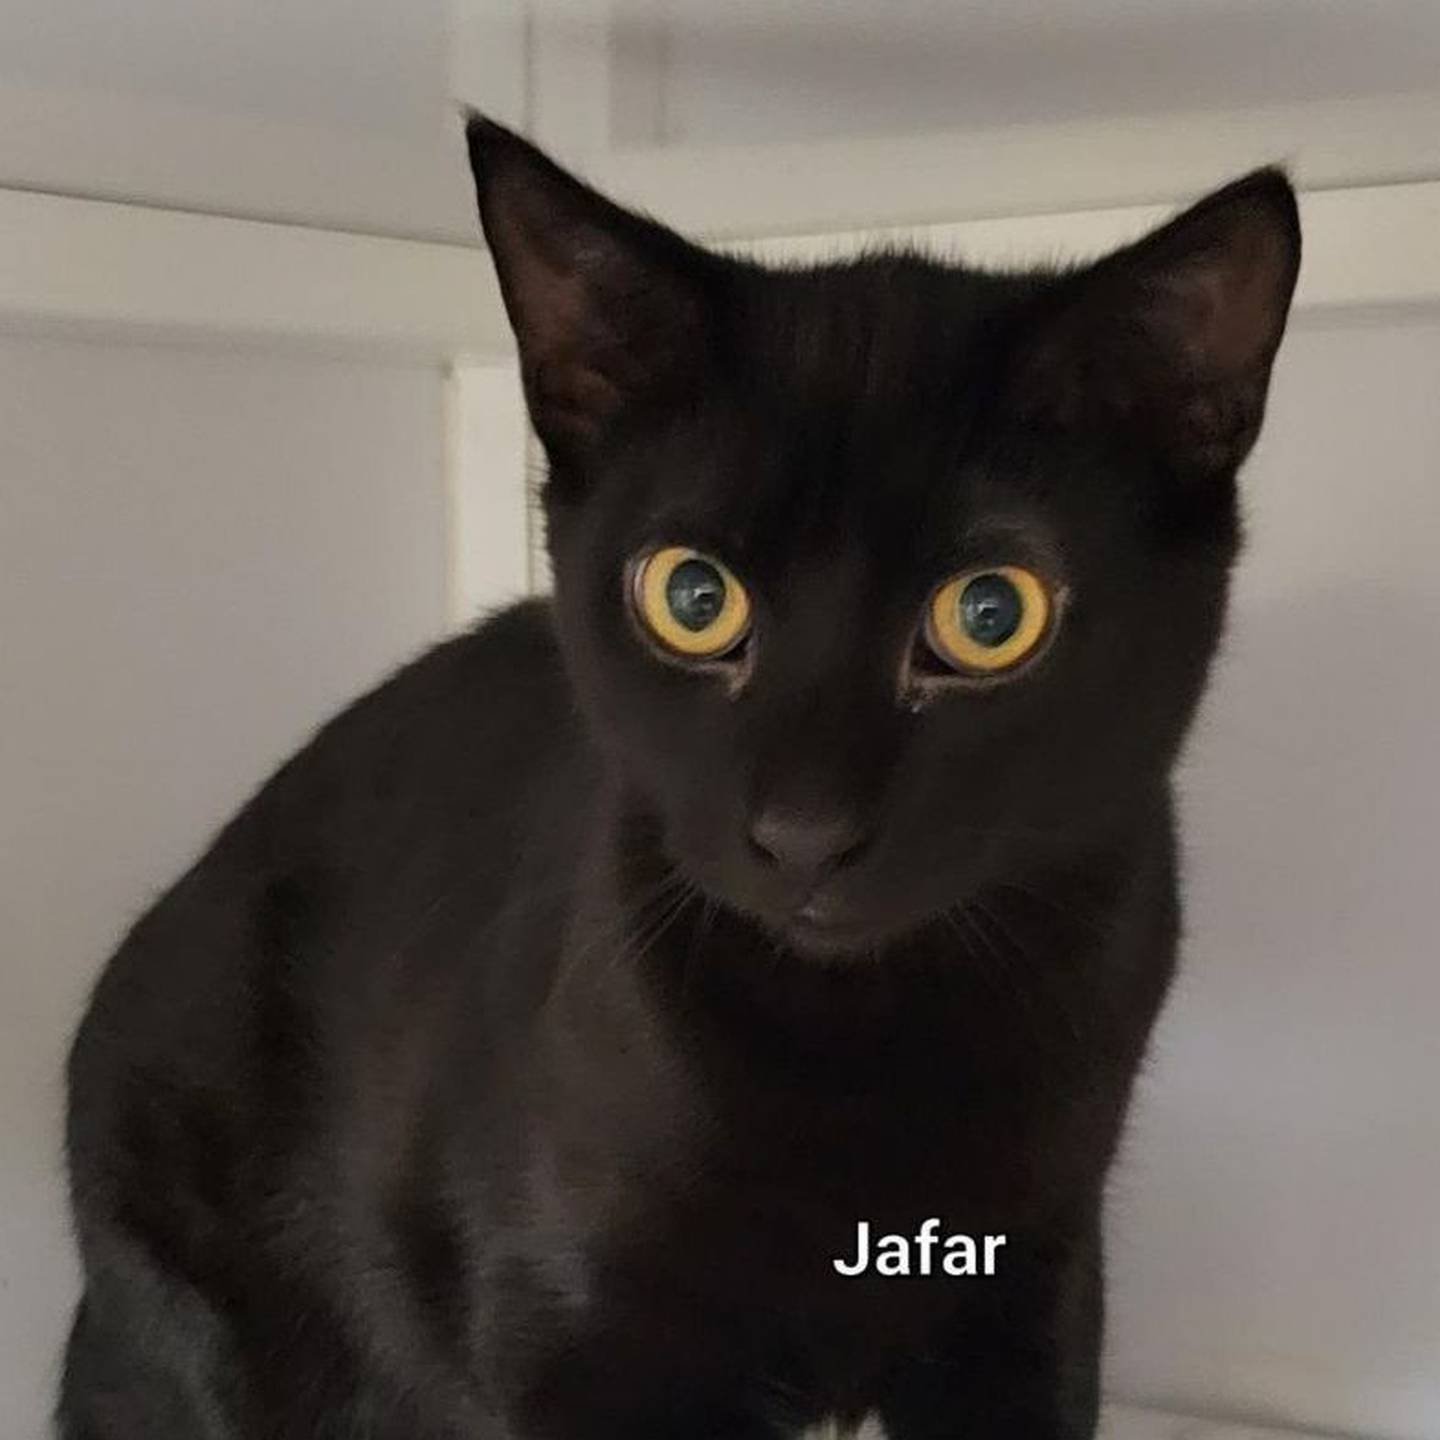 Jafar is a 2-year-old domestic shorthair. He is loving, independent, and curious. He is very sweet and immediately greets people. For more information on Jafar, including adoption fees please visit justanimals.org or call 815-448-2510.